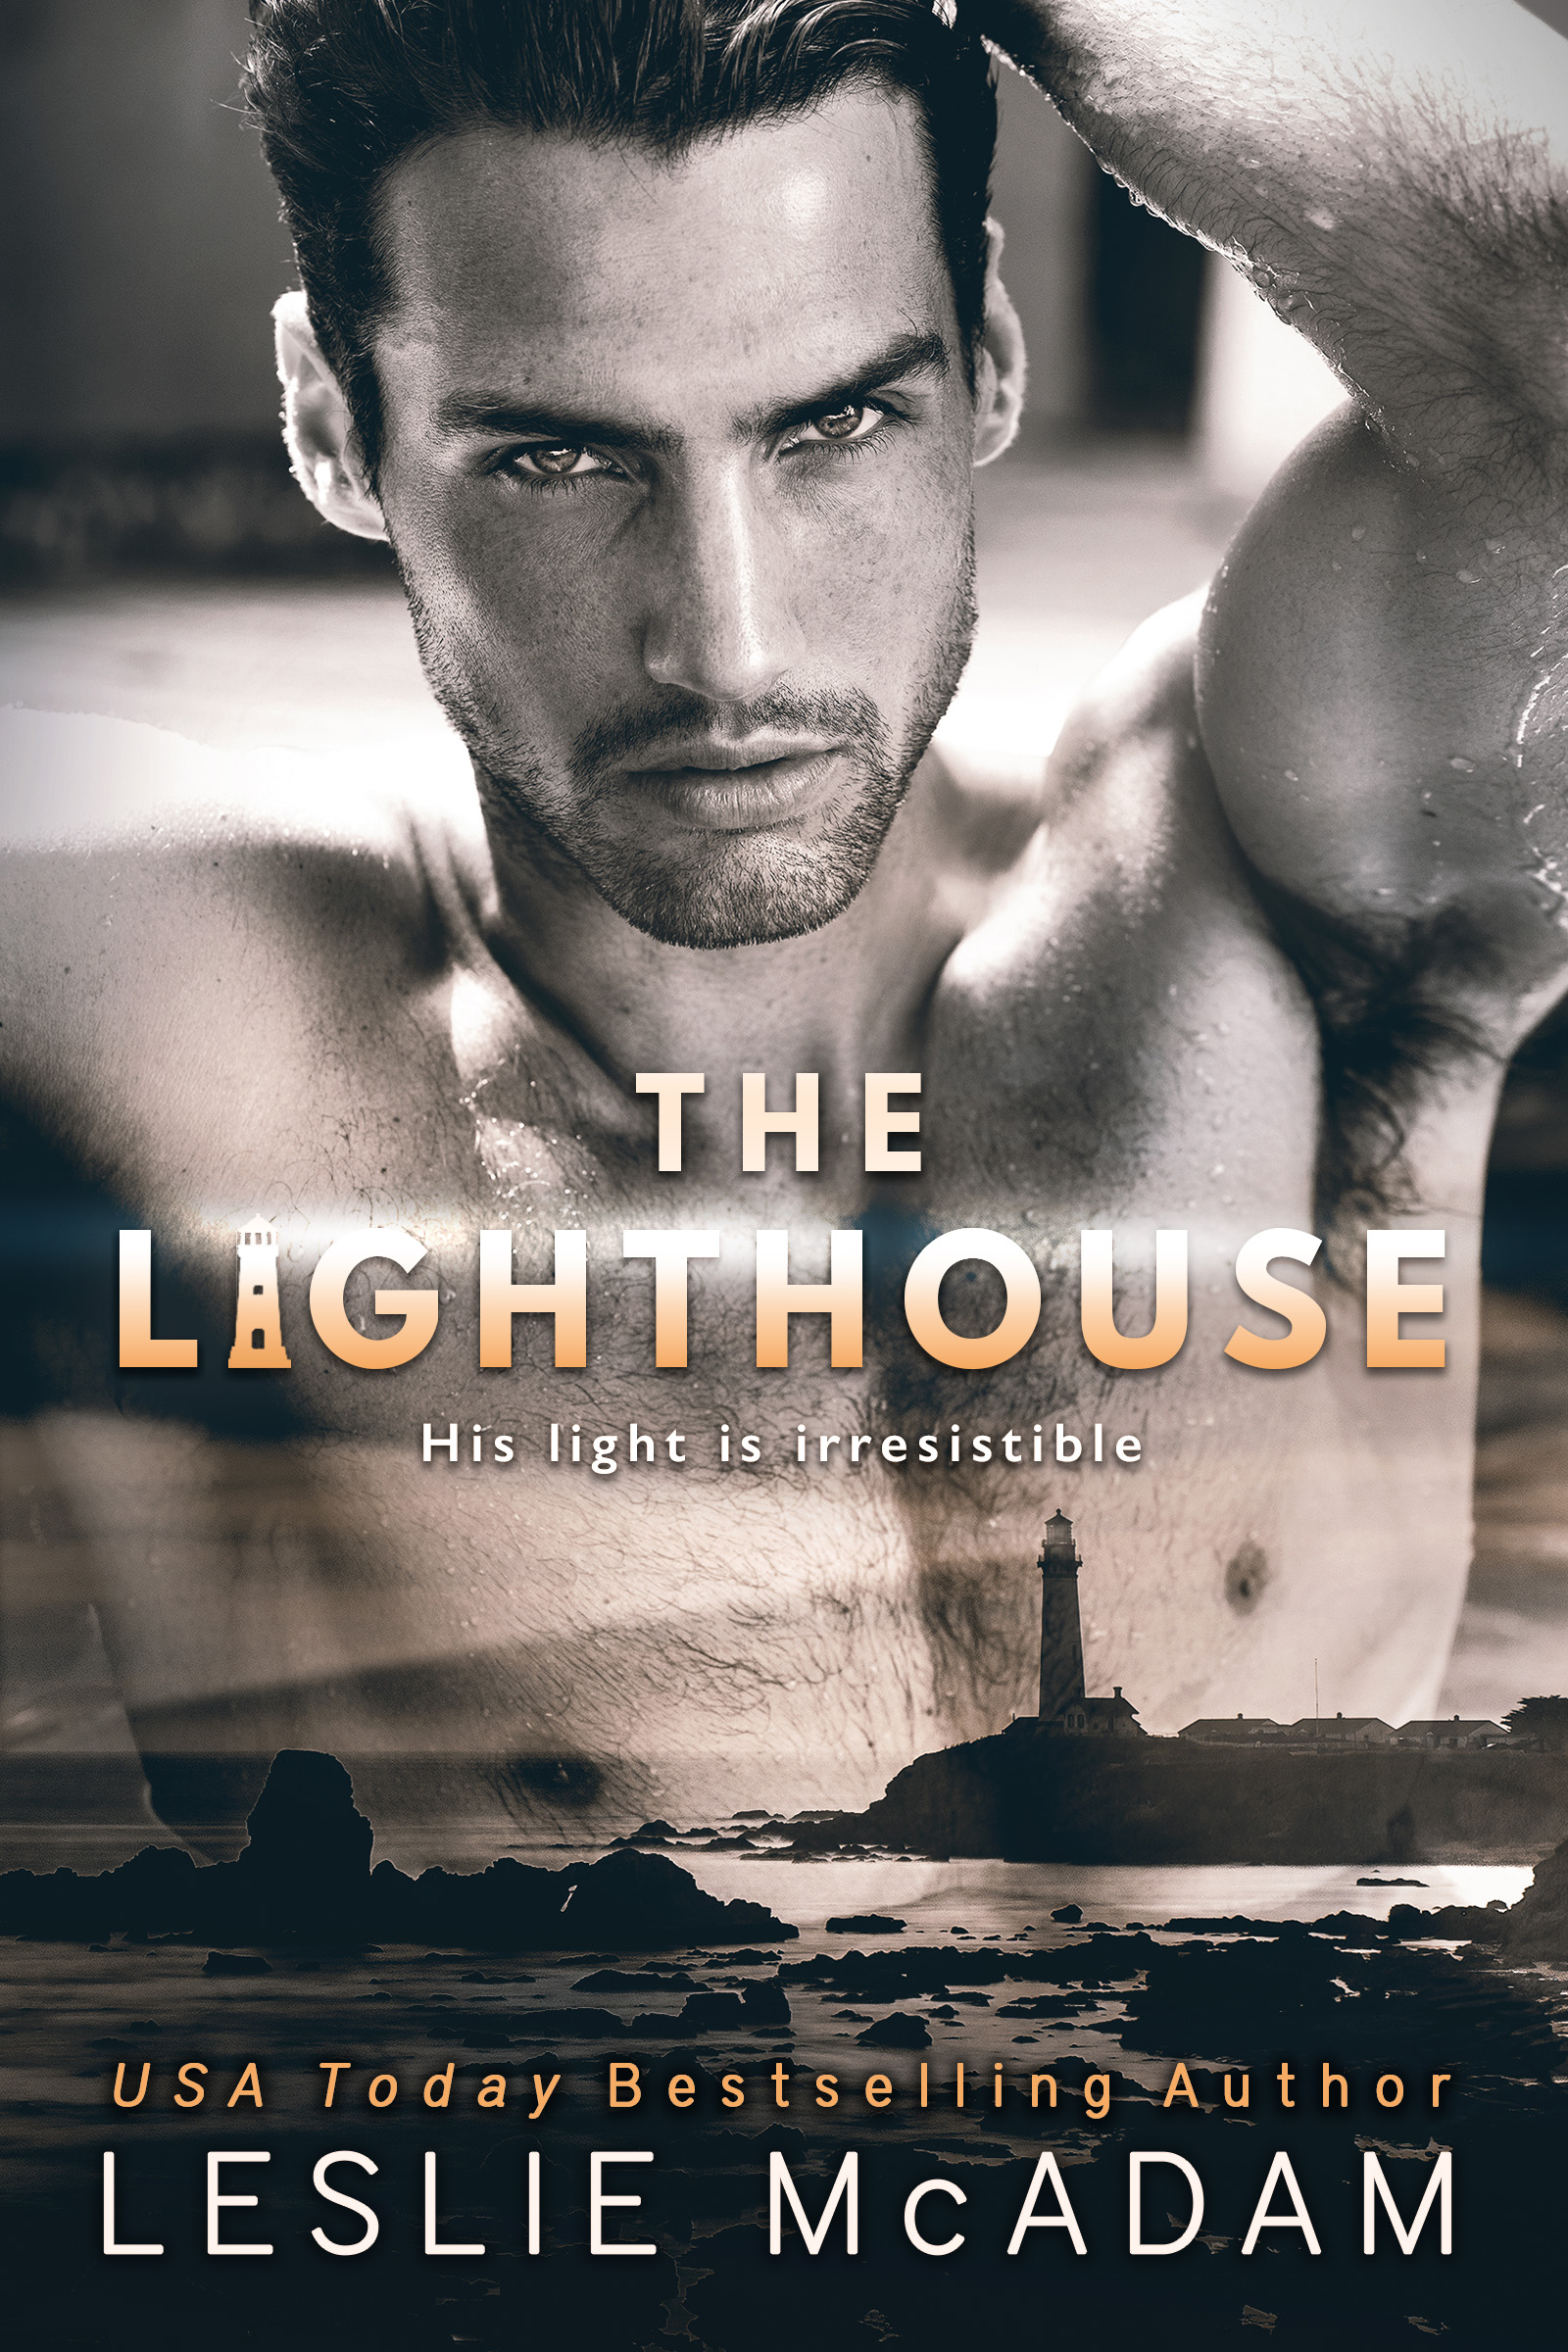 The Lighthouse by Leslie McAdam [Cover Reveal]